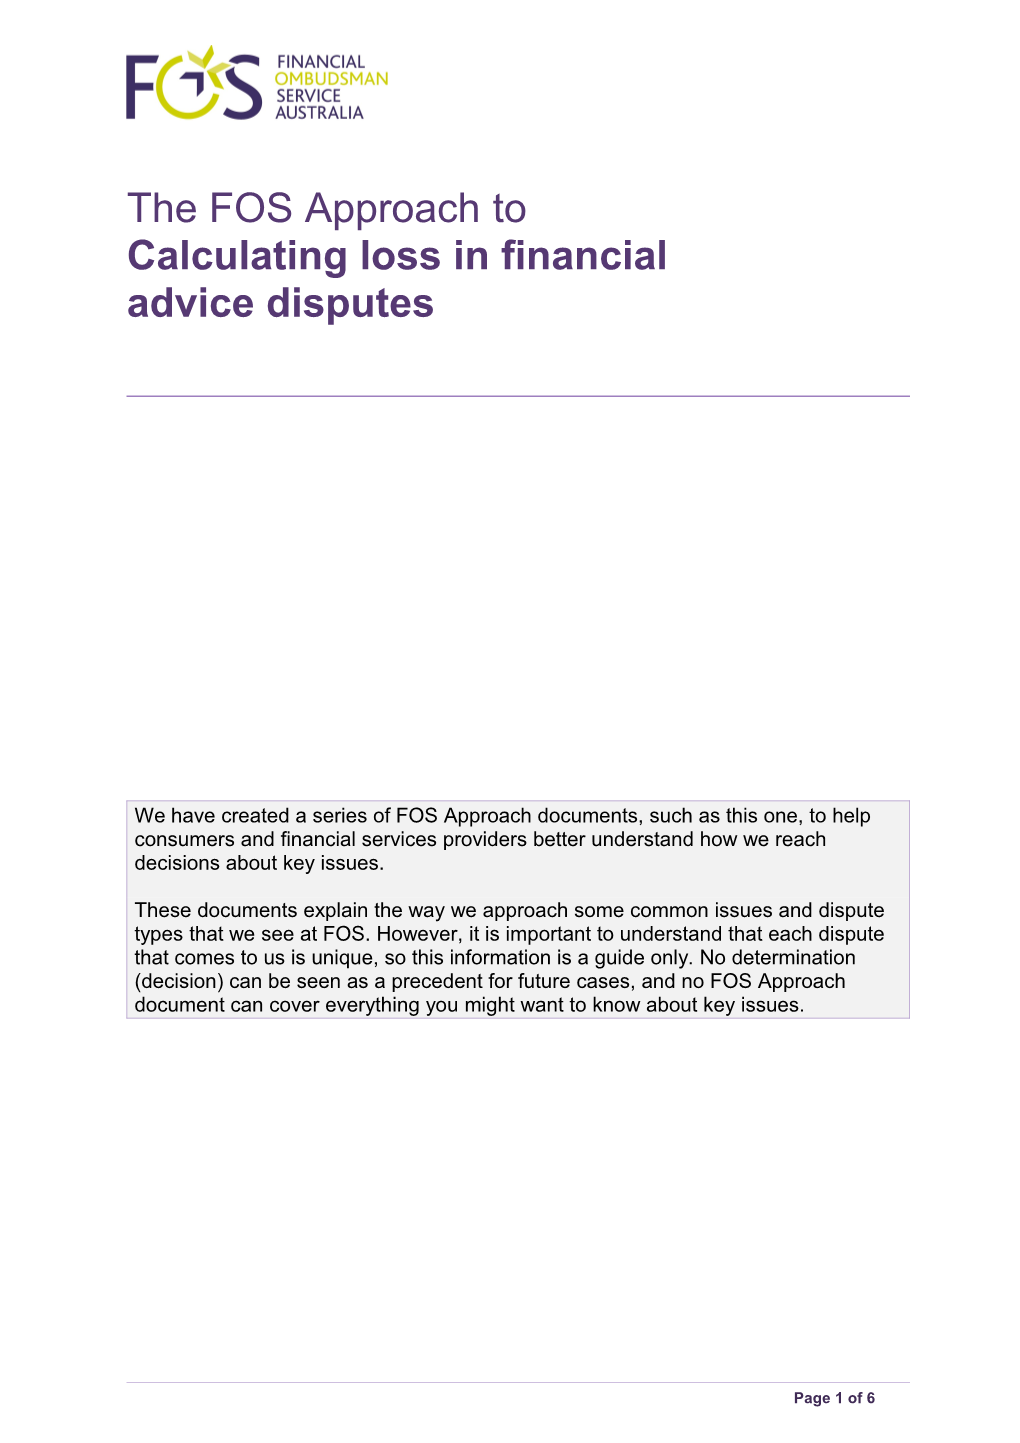 Approach to Calculating Loss in Financial